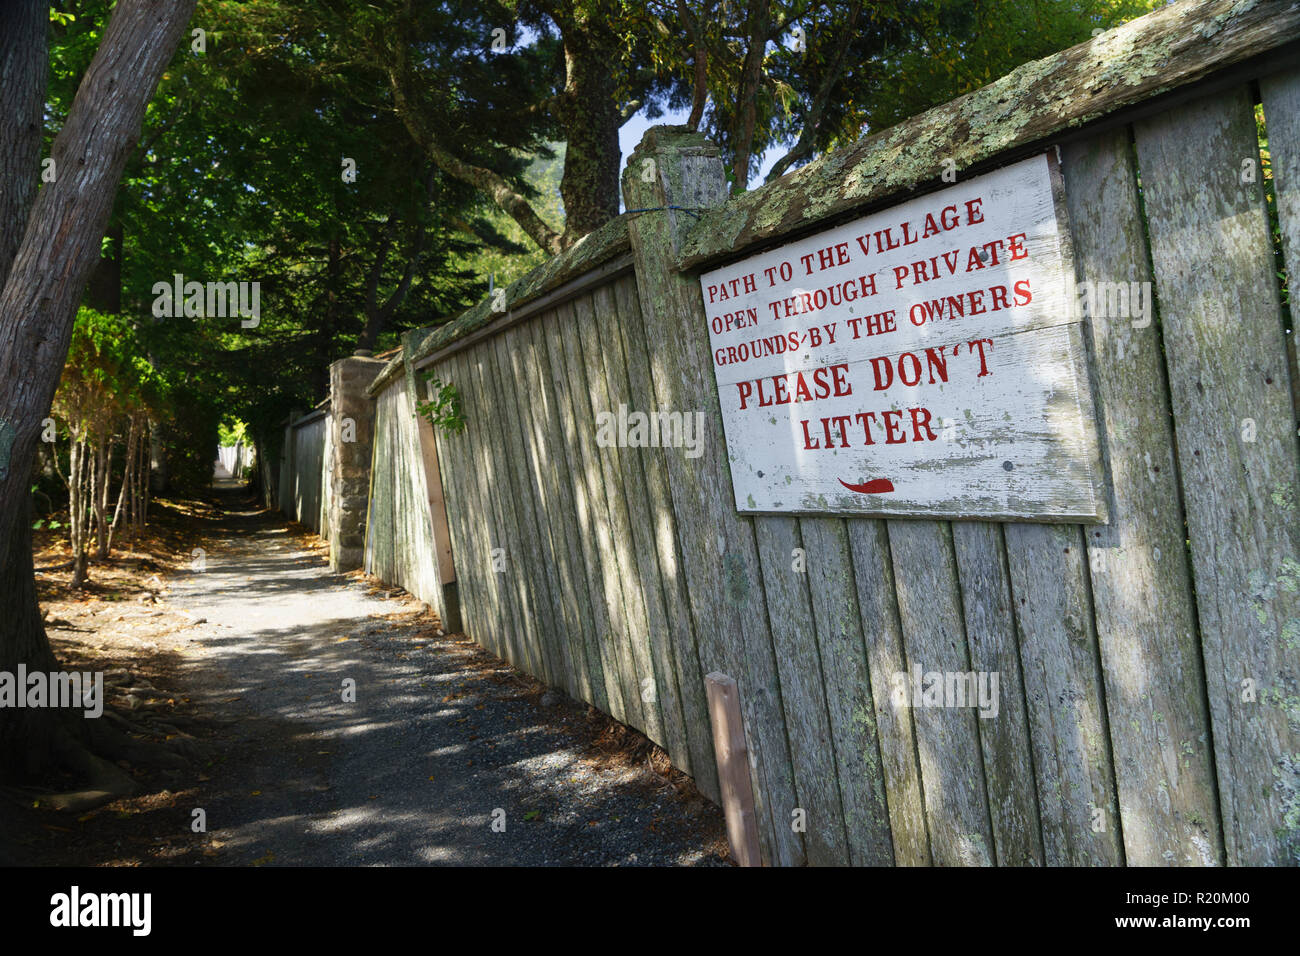 Path opened through private grounds and no littering sign on an old wooden fence, Bar Harbor, Maine, USA. Stock Photo